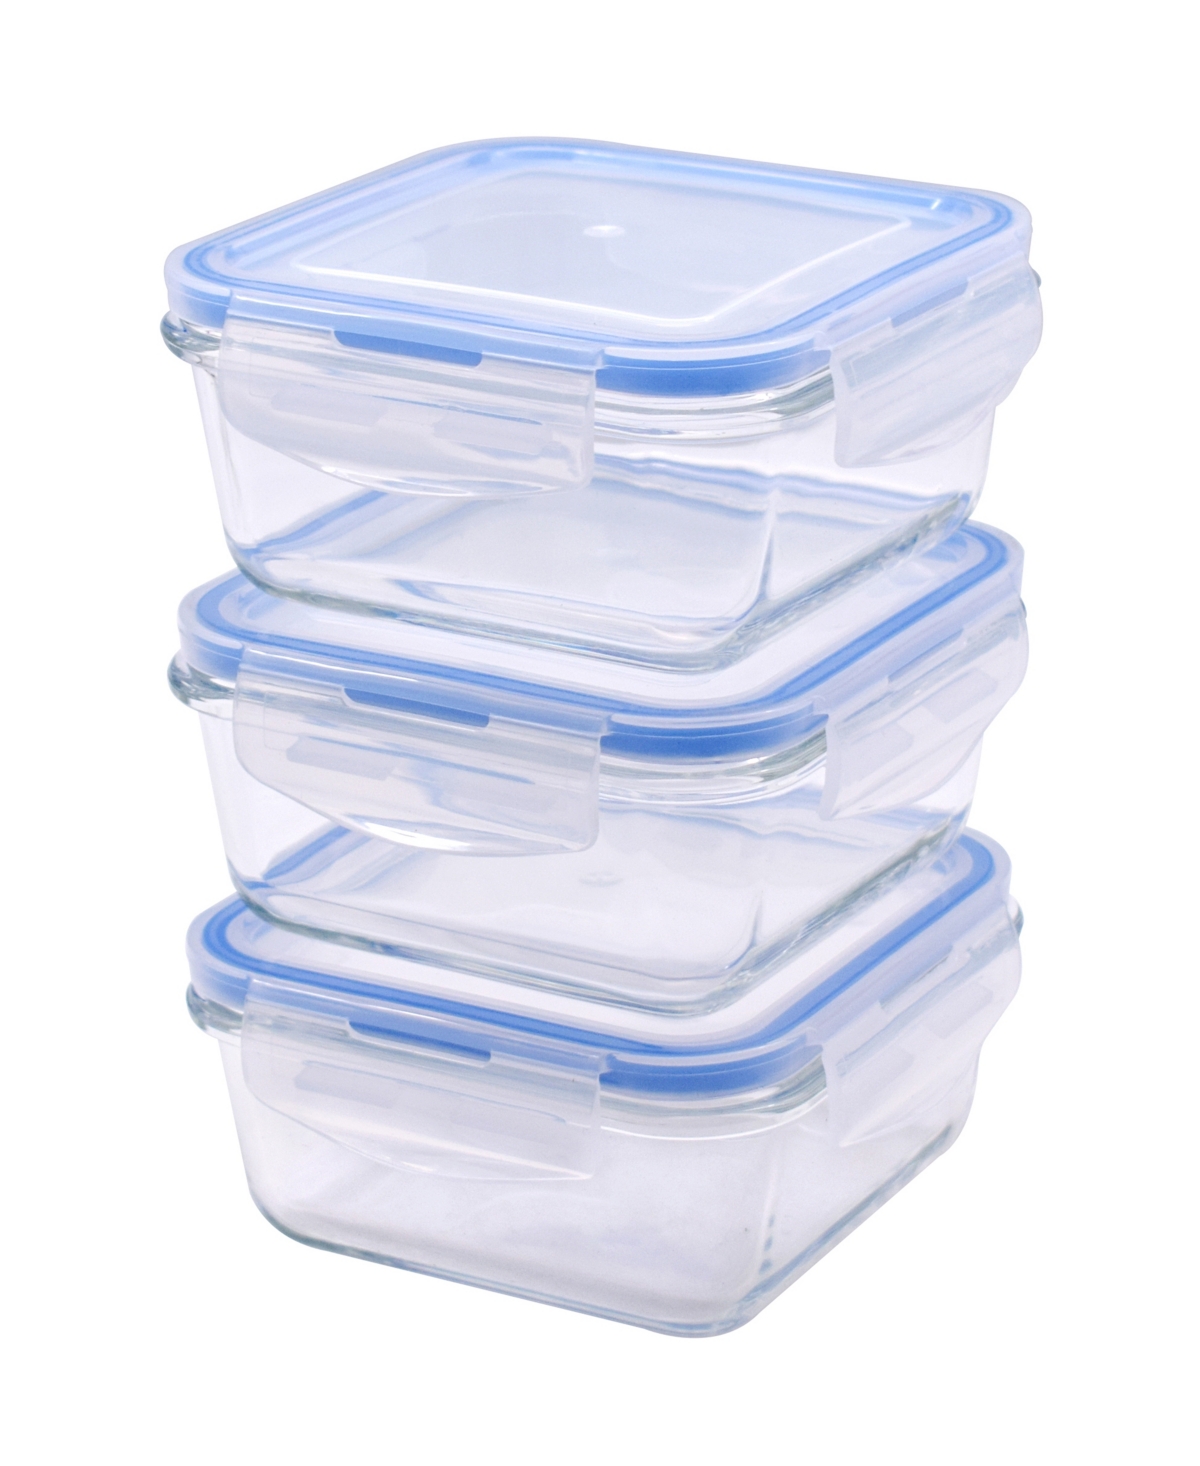 Art & Cook 3 Piece Square 570 ml Food Storage With Locking Lid Set In Blue